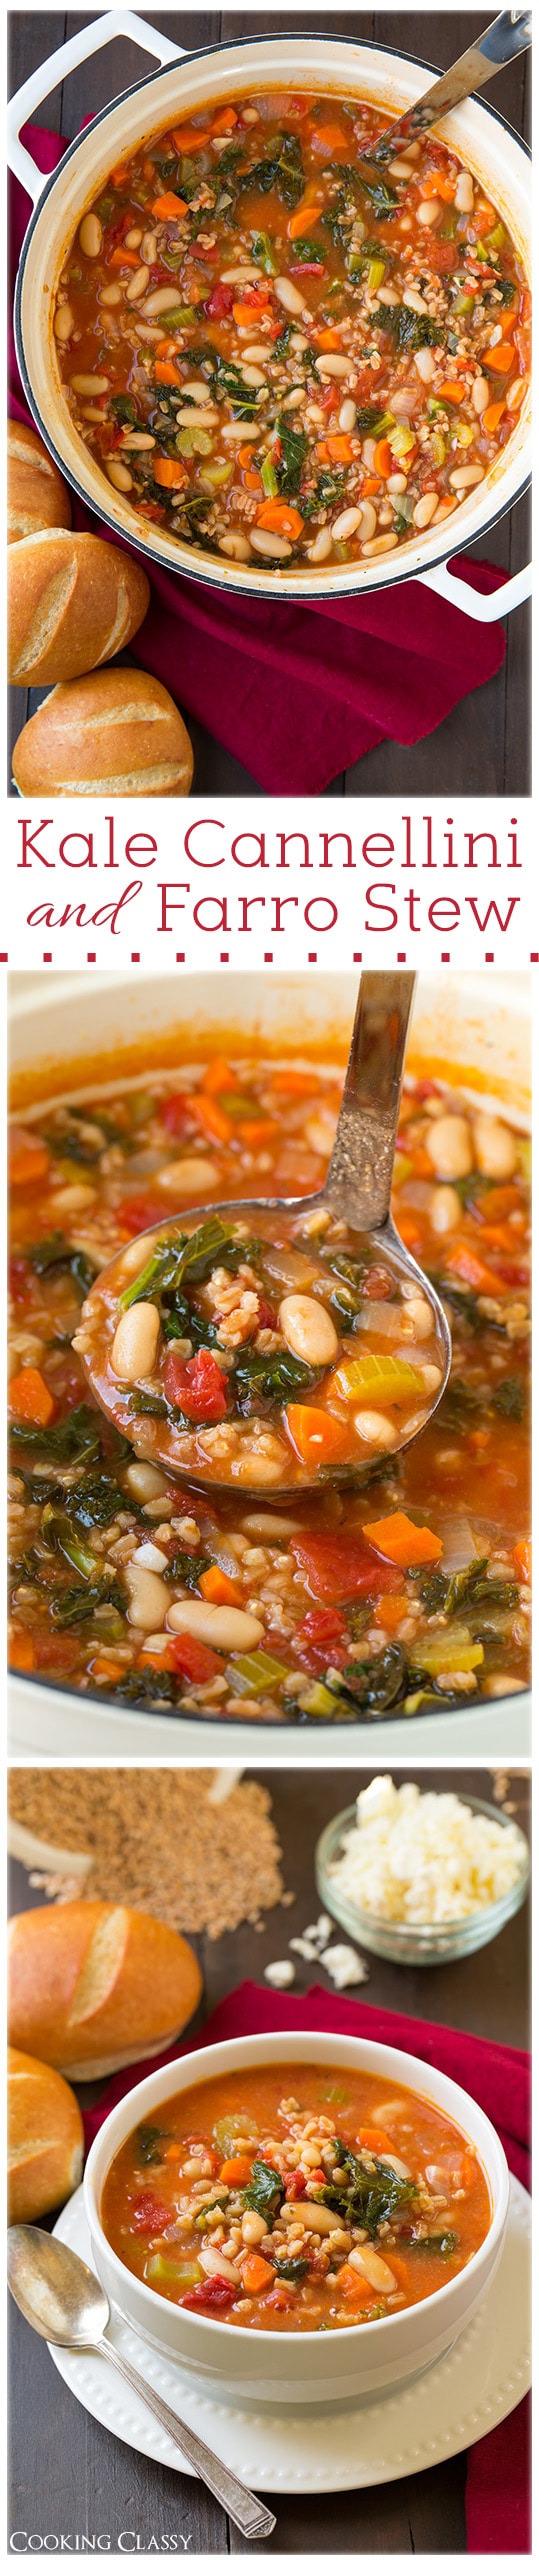 Farro Stew with Kale & Cannellini Beans (Mediterranean) - Cooking Classy